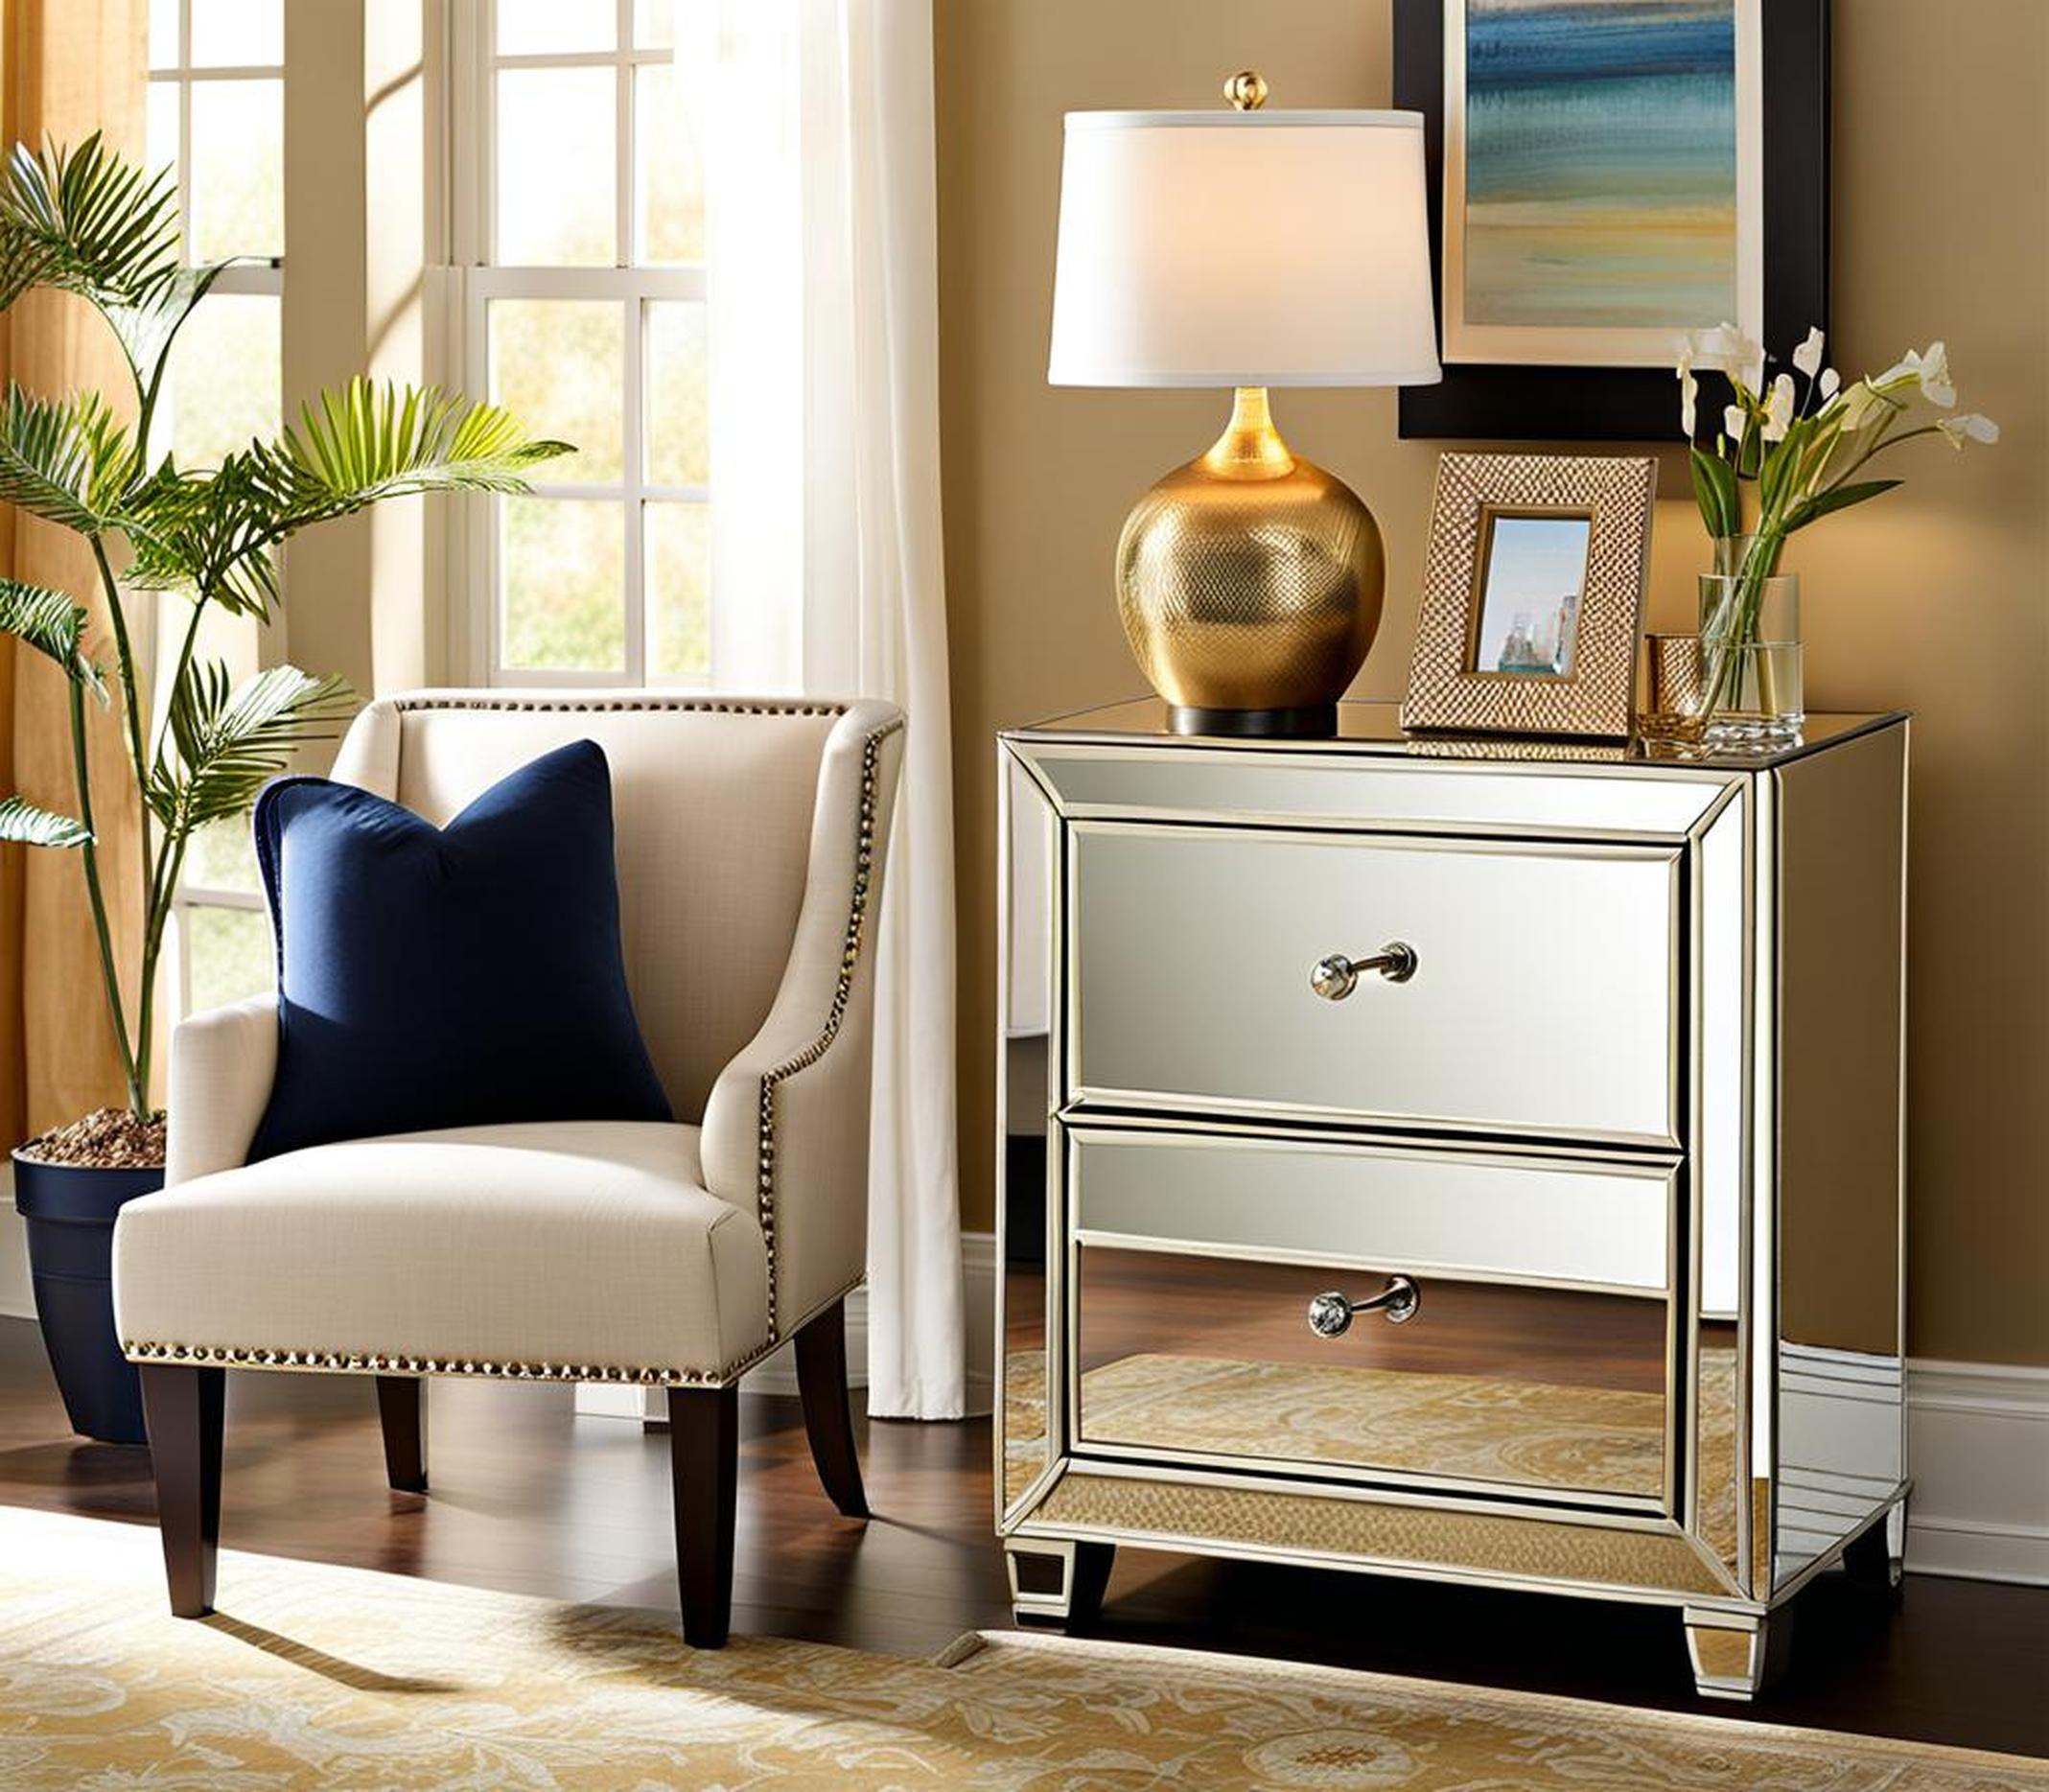 Mirrored Nightstands 101 – Everything You Need to Know About the Pier One Style